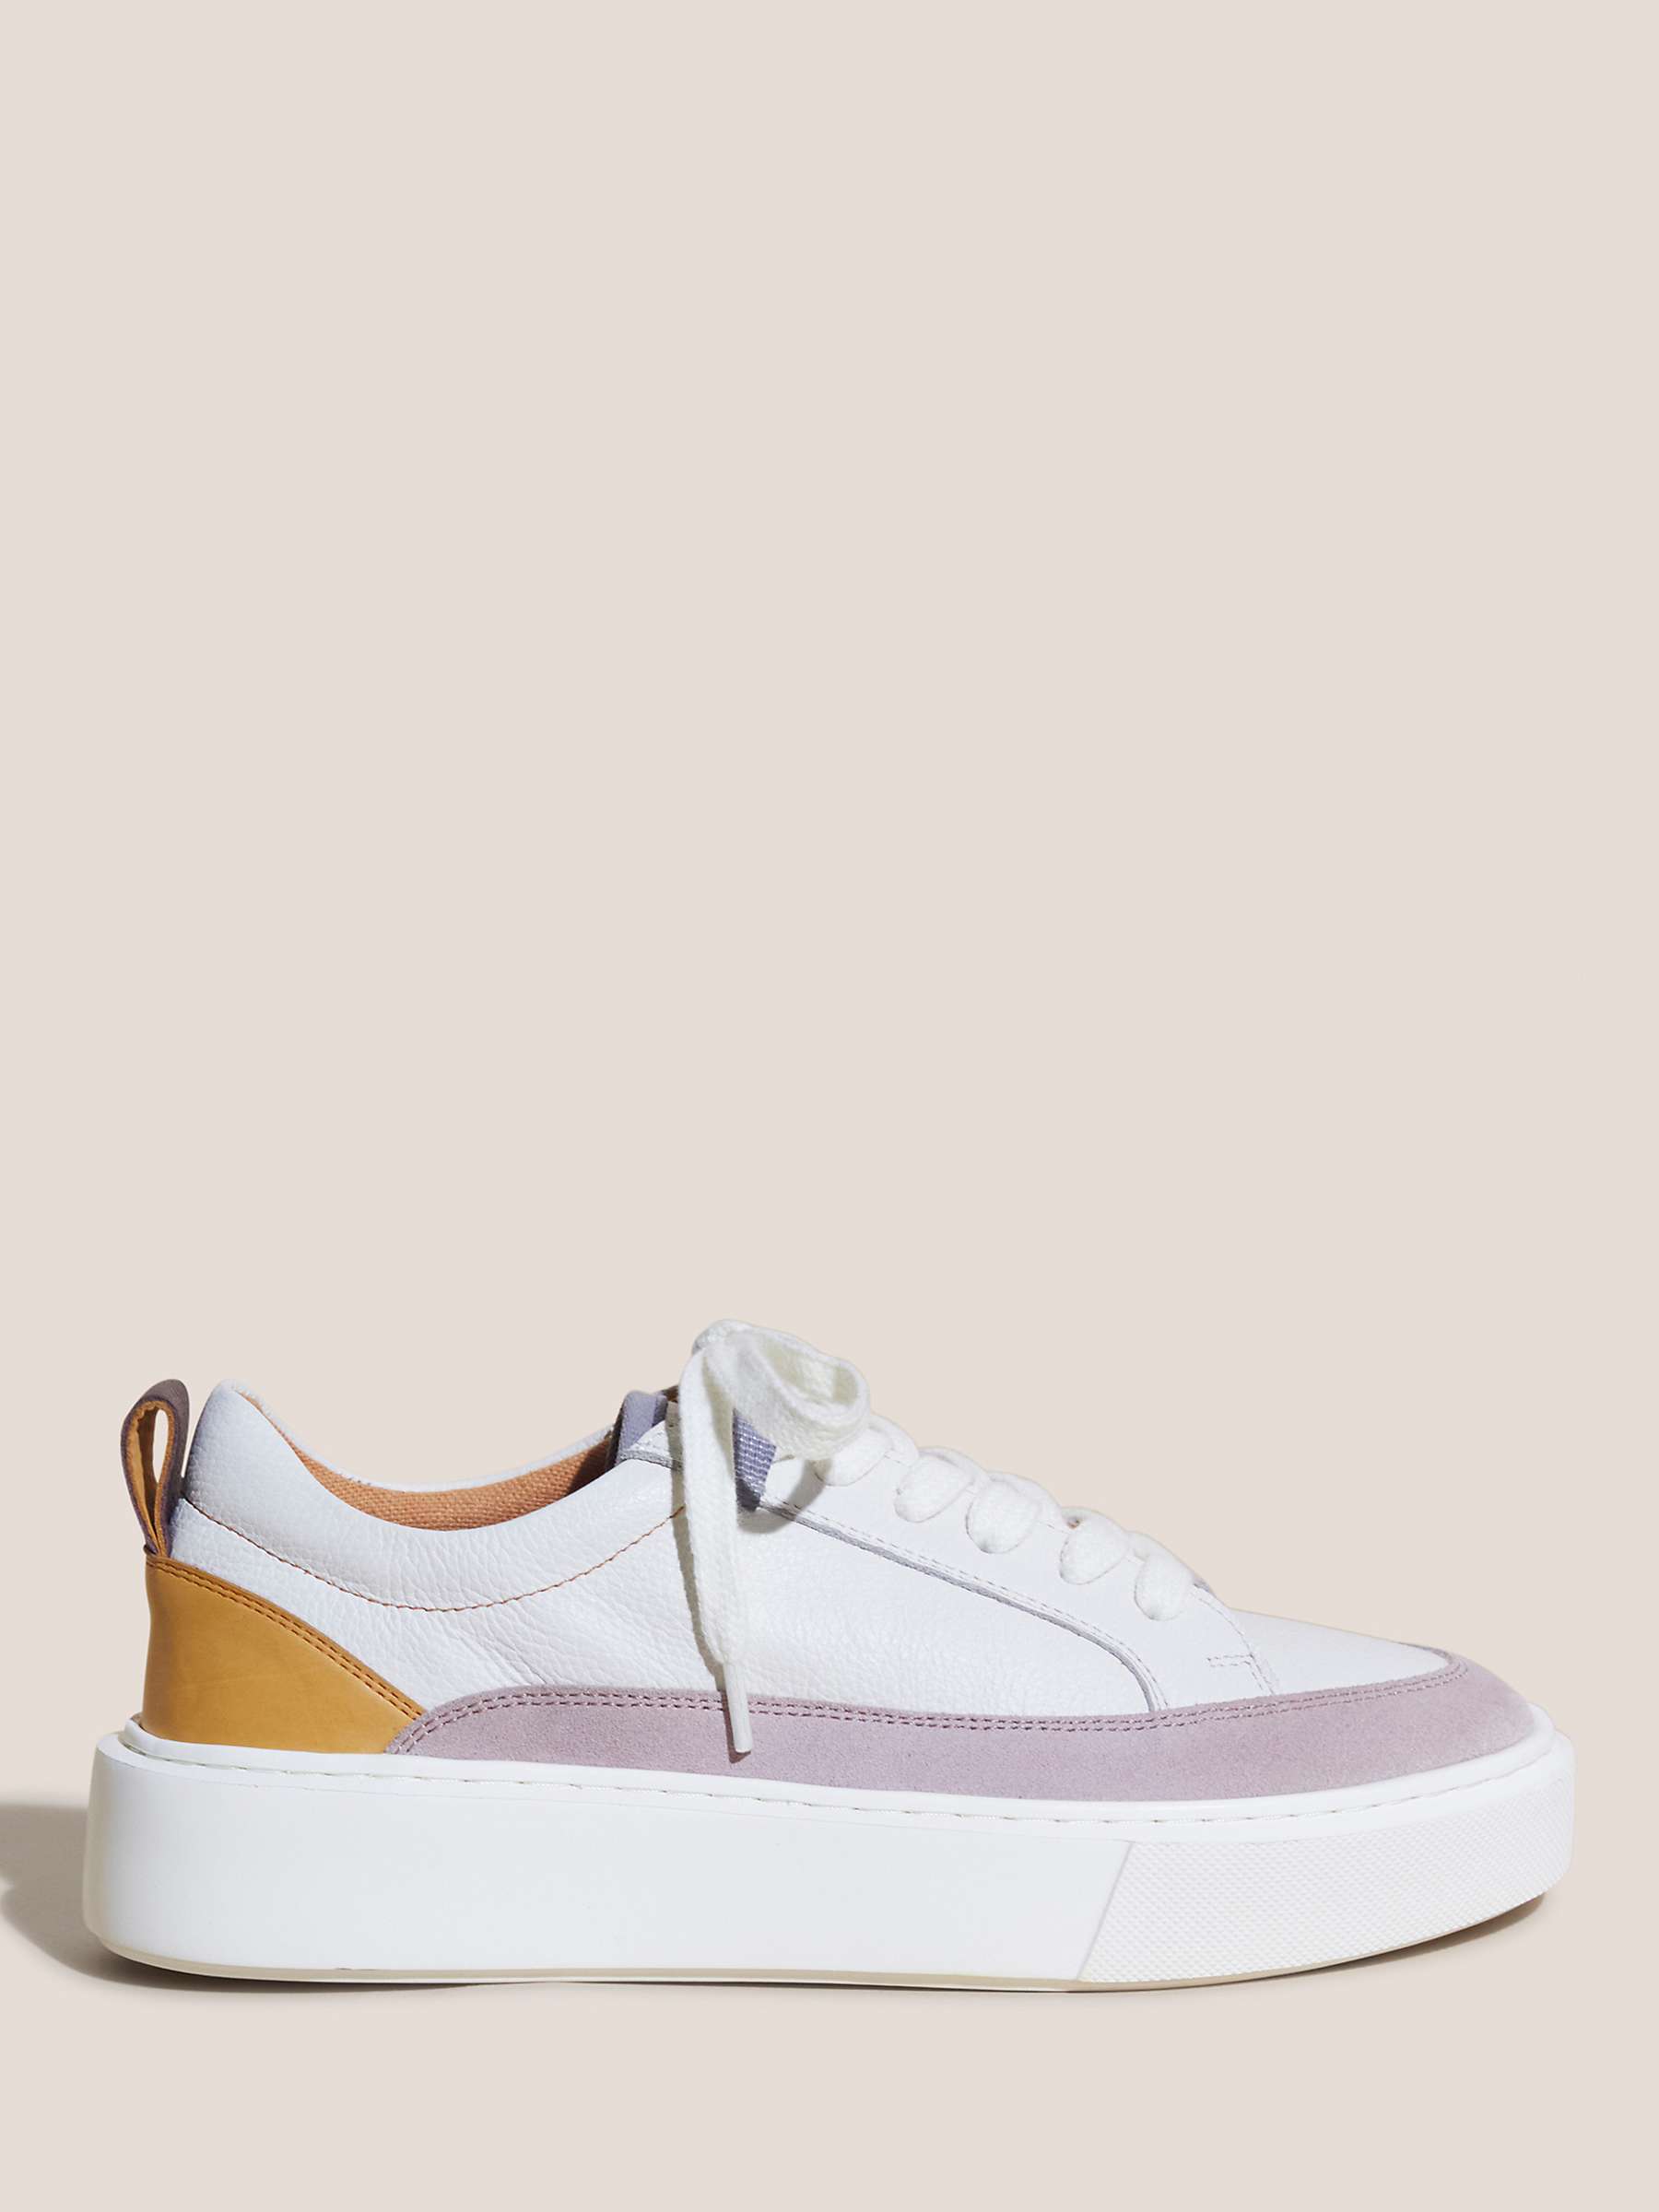 Buy White Stuff Leather Trainers, White/Multi Online at johnlewis.com